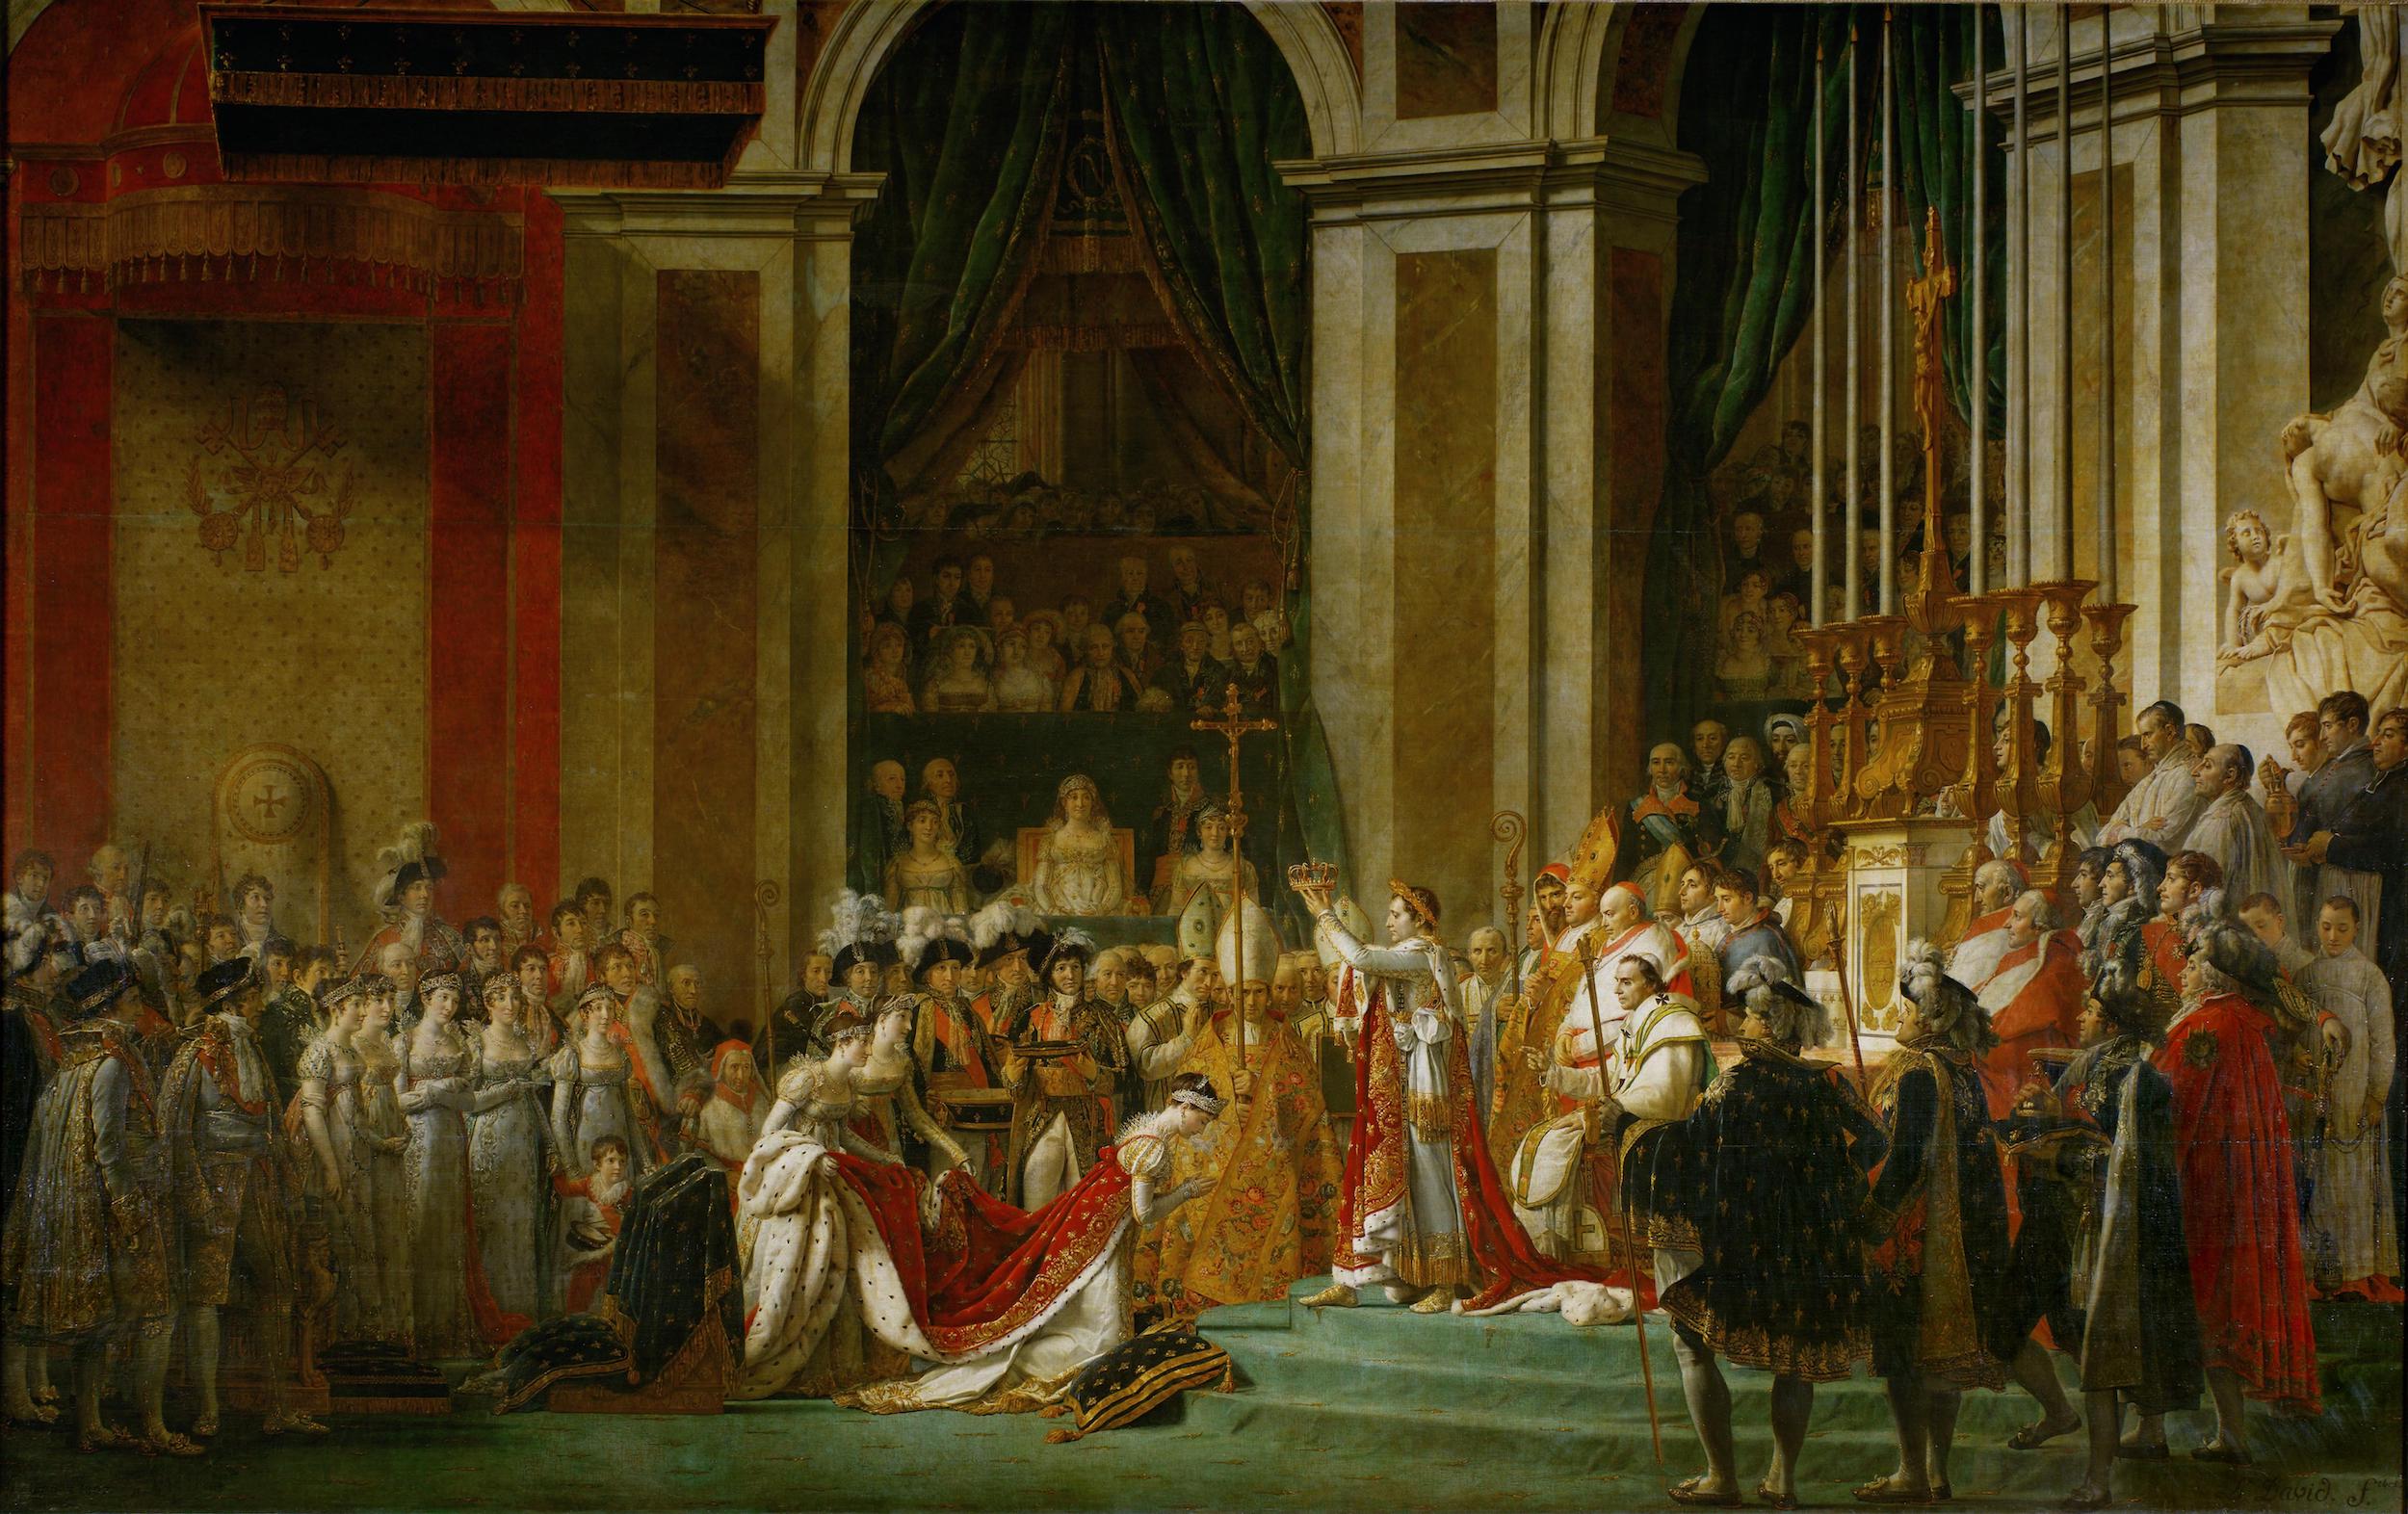 The Coronation of the Emperor Napoleon I and the Crowning of the Empress Joséphine by Jacques-Louis David - 1806-1807 - 6,21 x 9.79 m Musée du Louvre